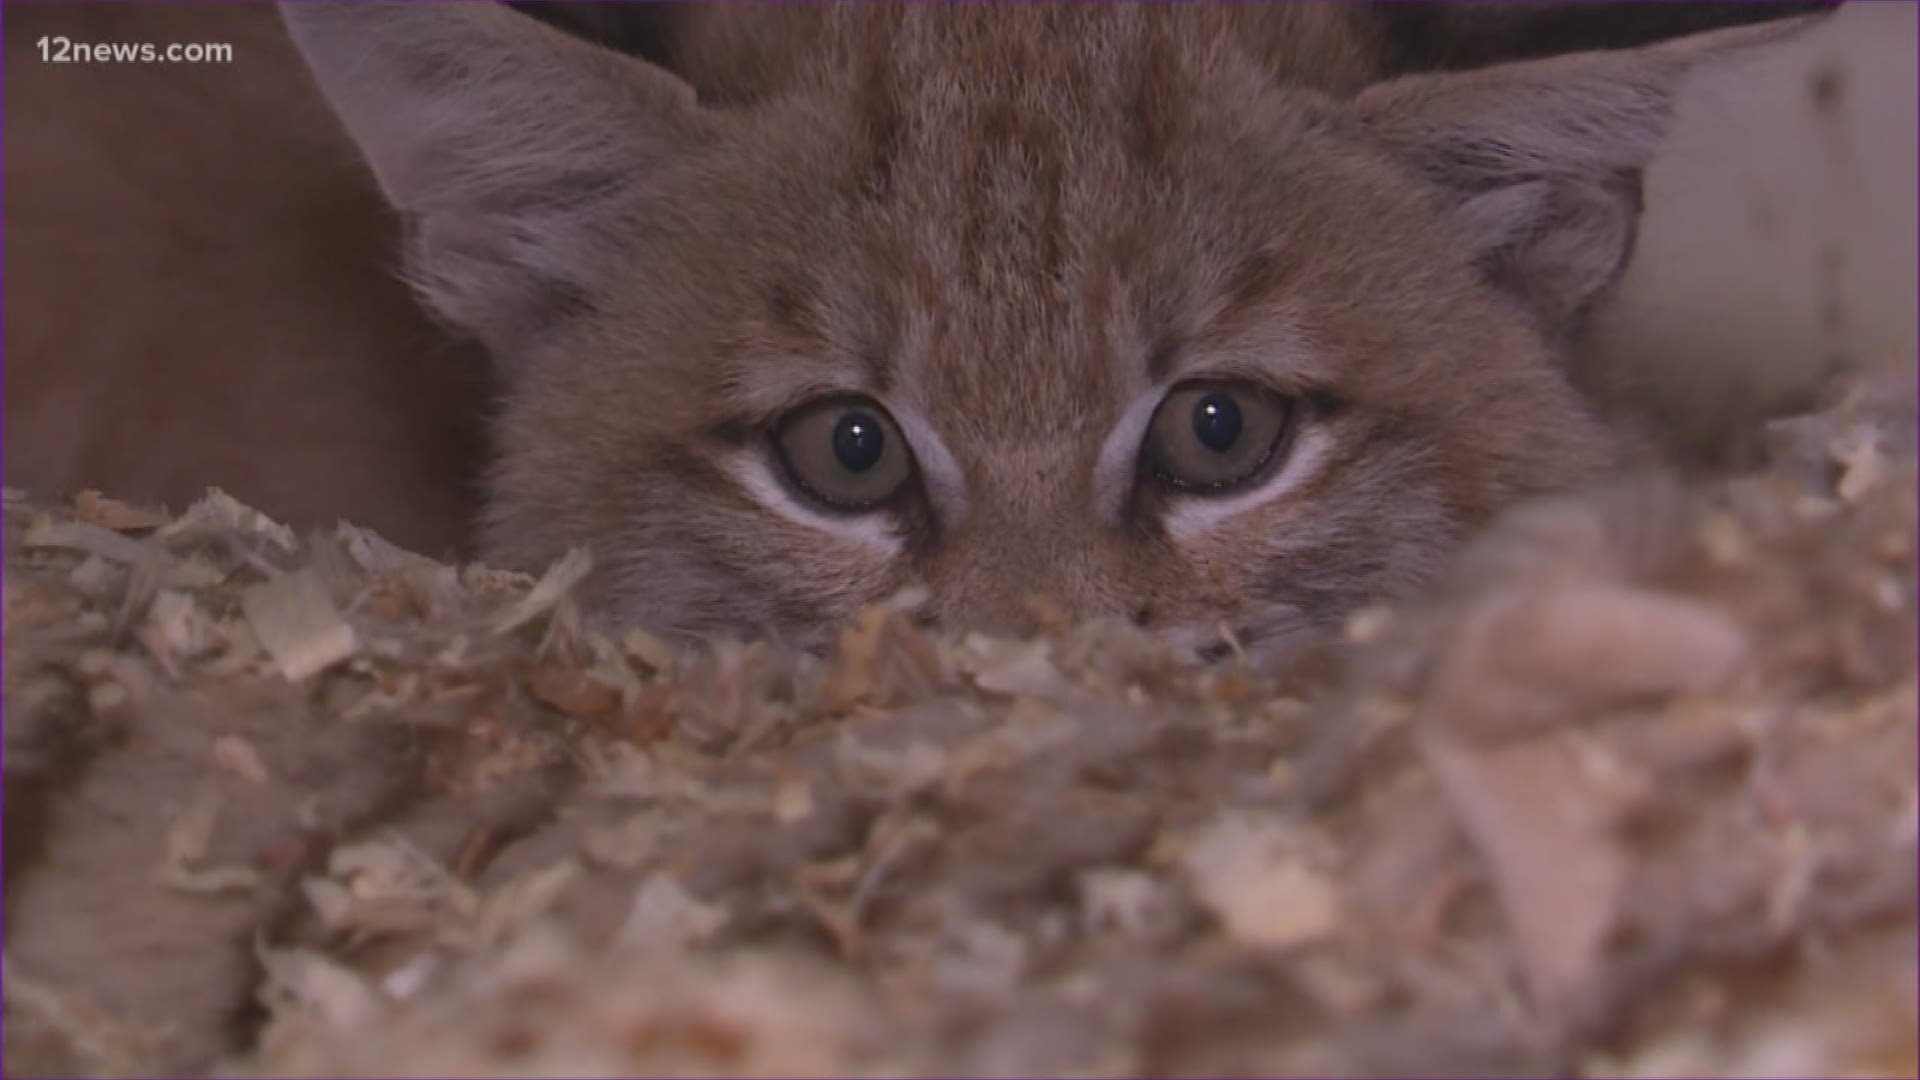 The Woodbury Fire is pushing a lot of baby animals out of their natural habitat. The Southwest Wildlife Conservation Center is seeing an influx of orphaned animals this year.